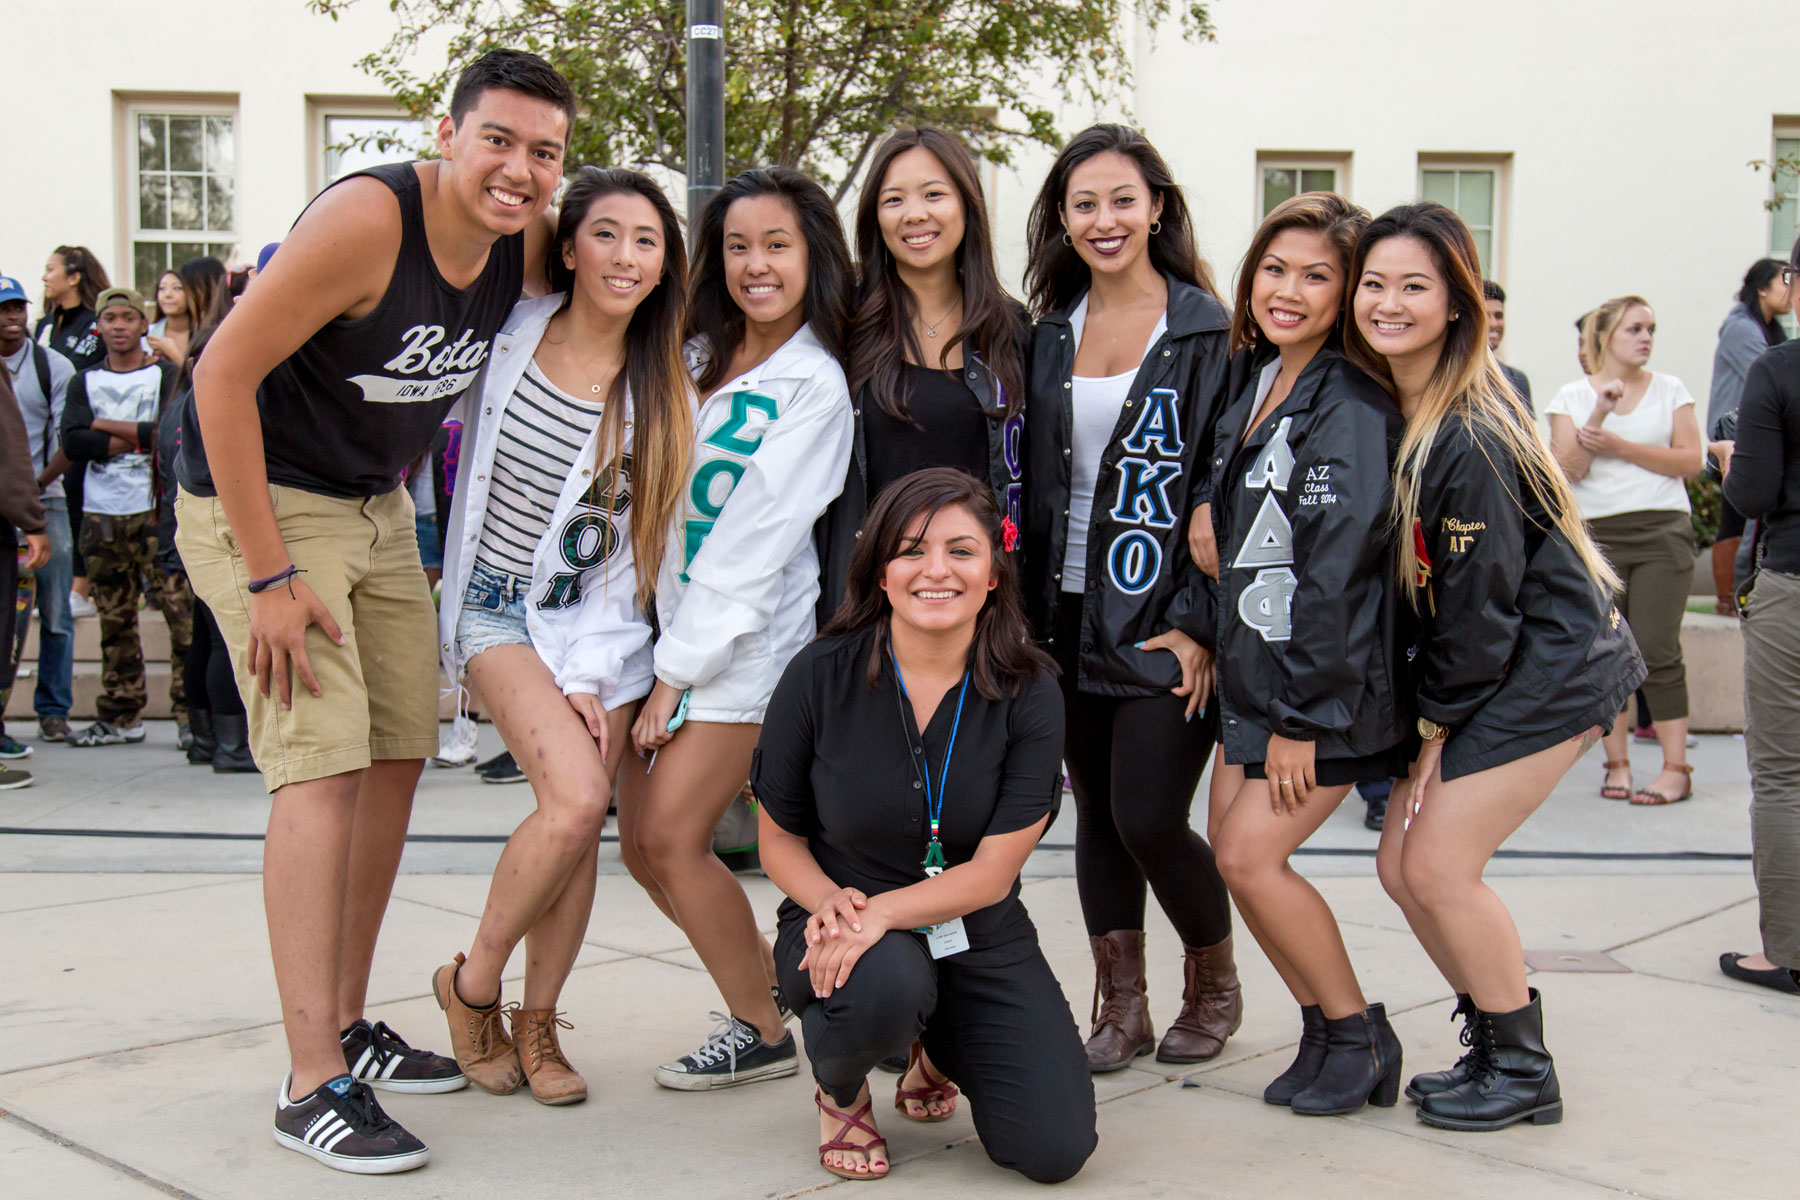 Council of fraternities and sororities event at SJSU.